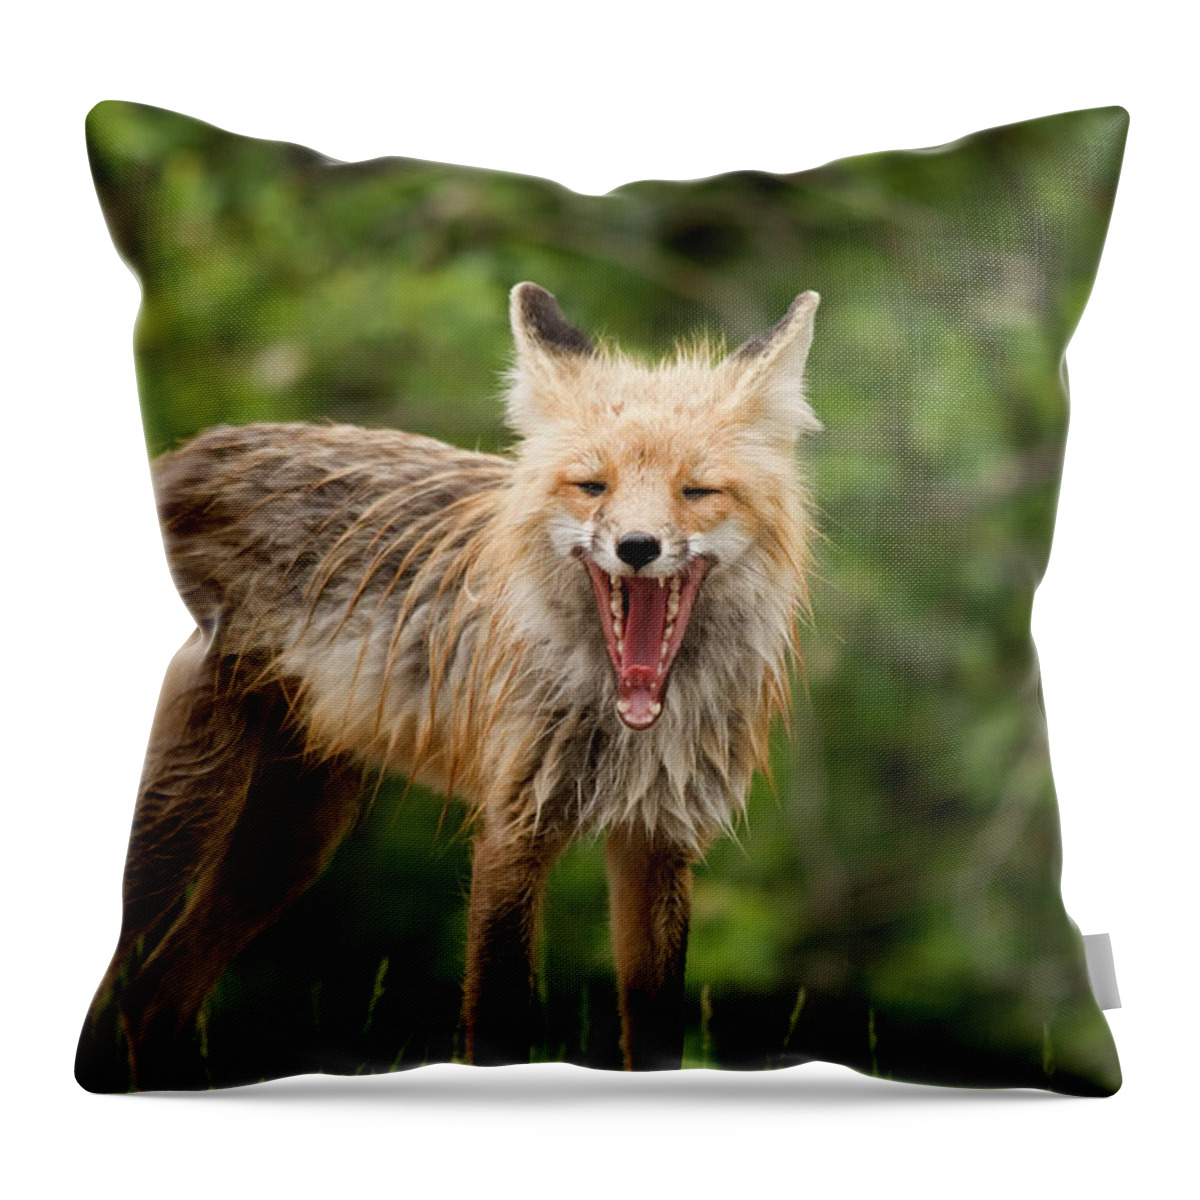 Snarling Throw Pillow featuring the photograph Red Fox Vulpes Vulpes In Prince Albert #1 by Philippe Widling / Design Pics